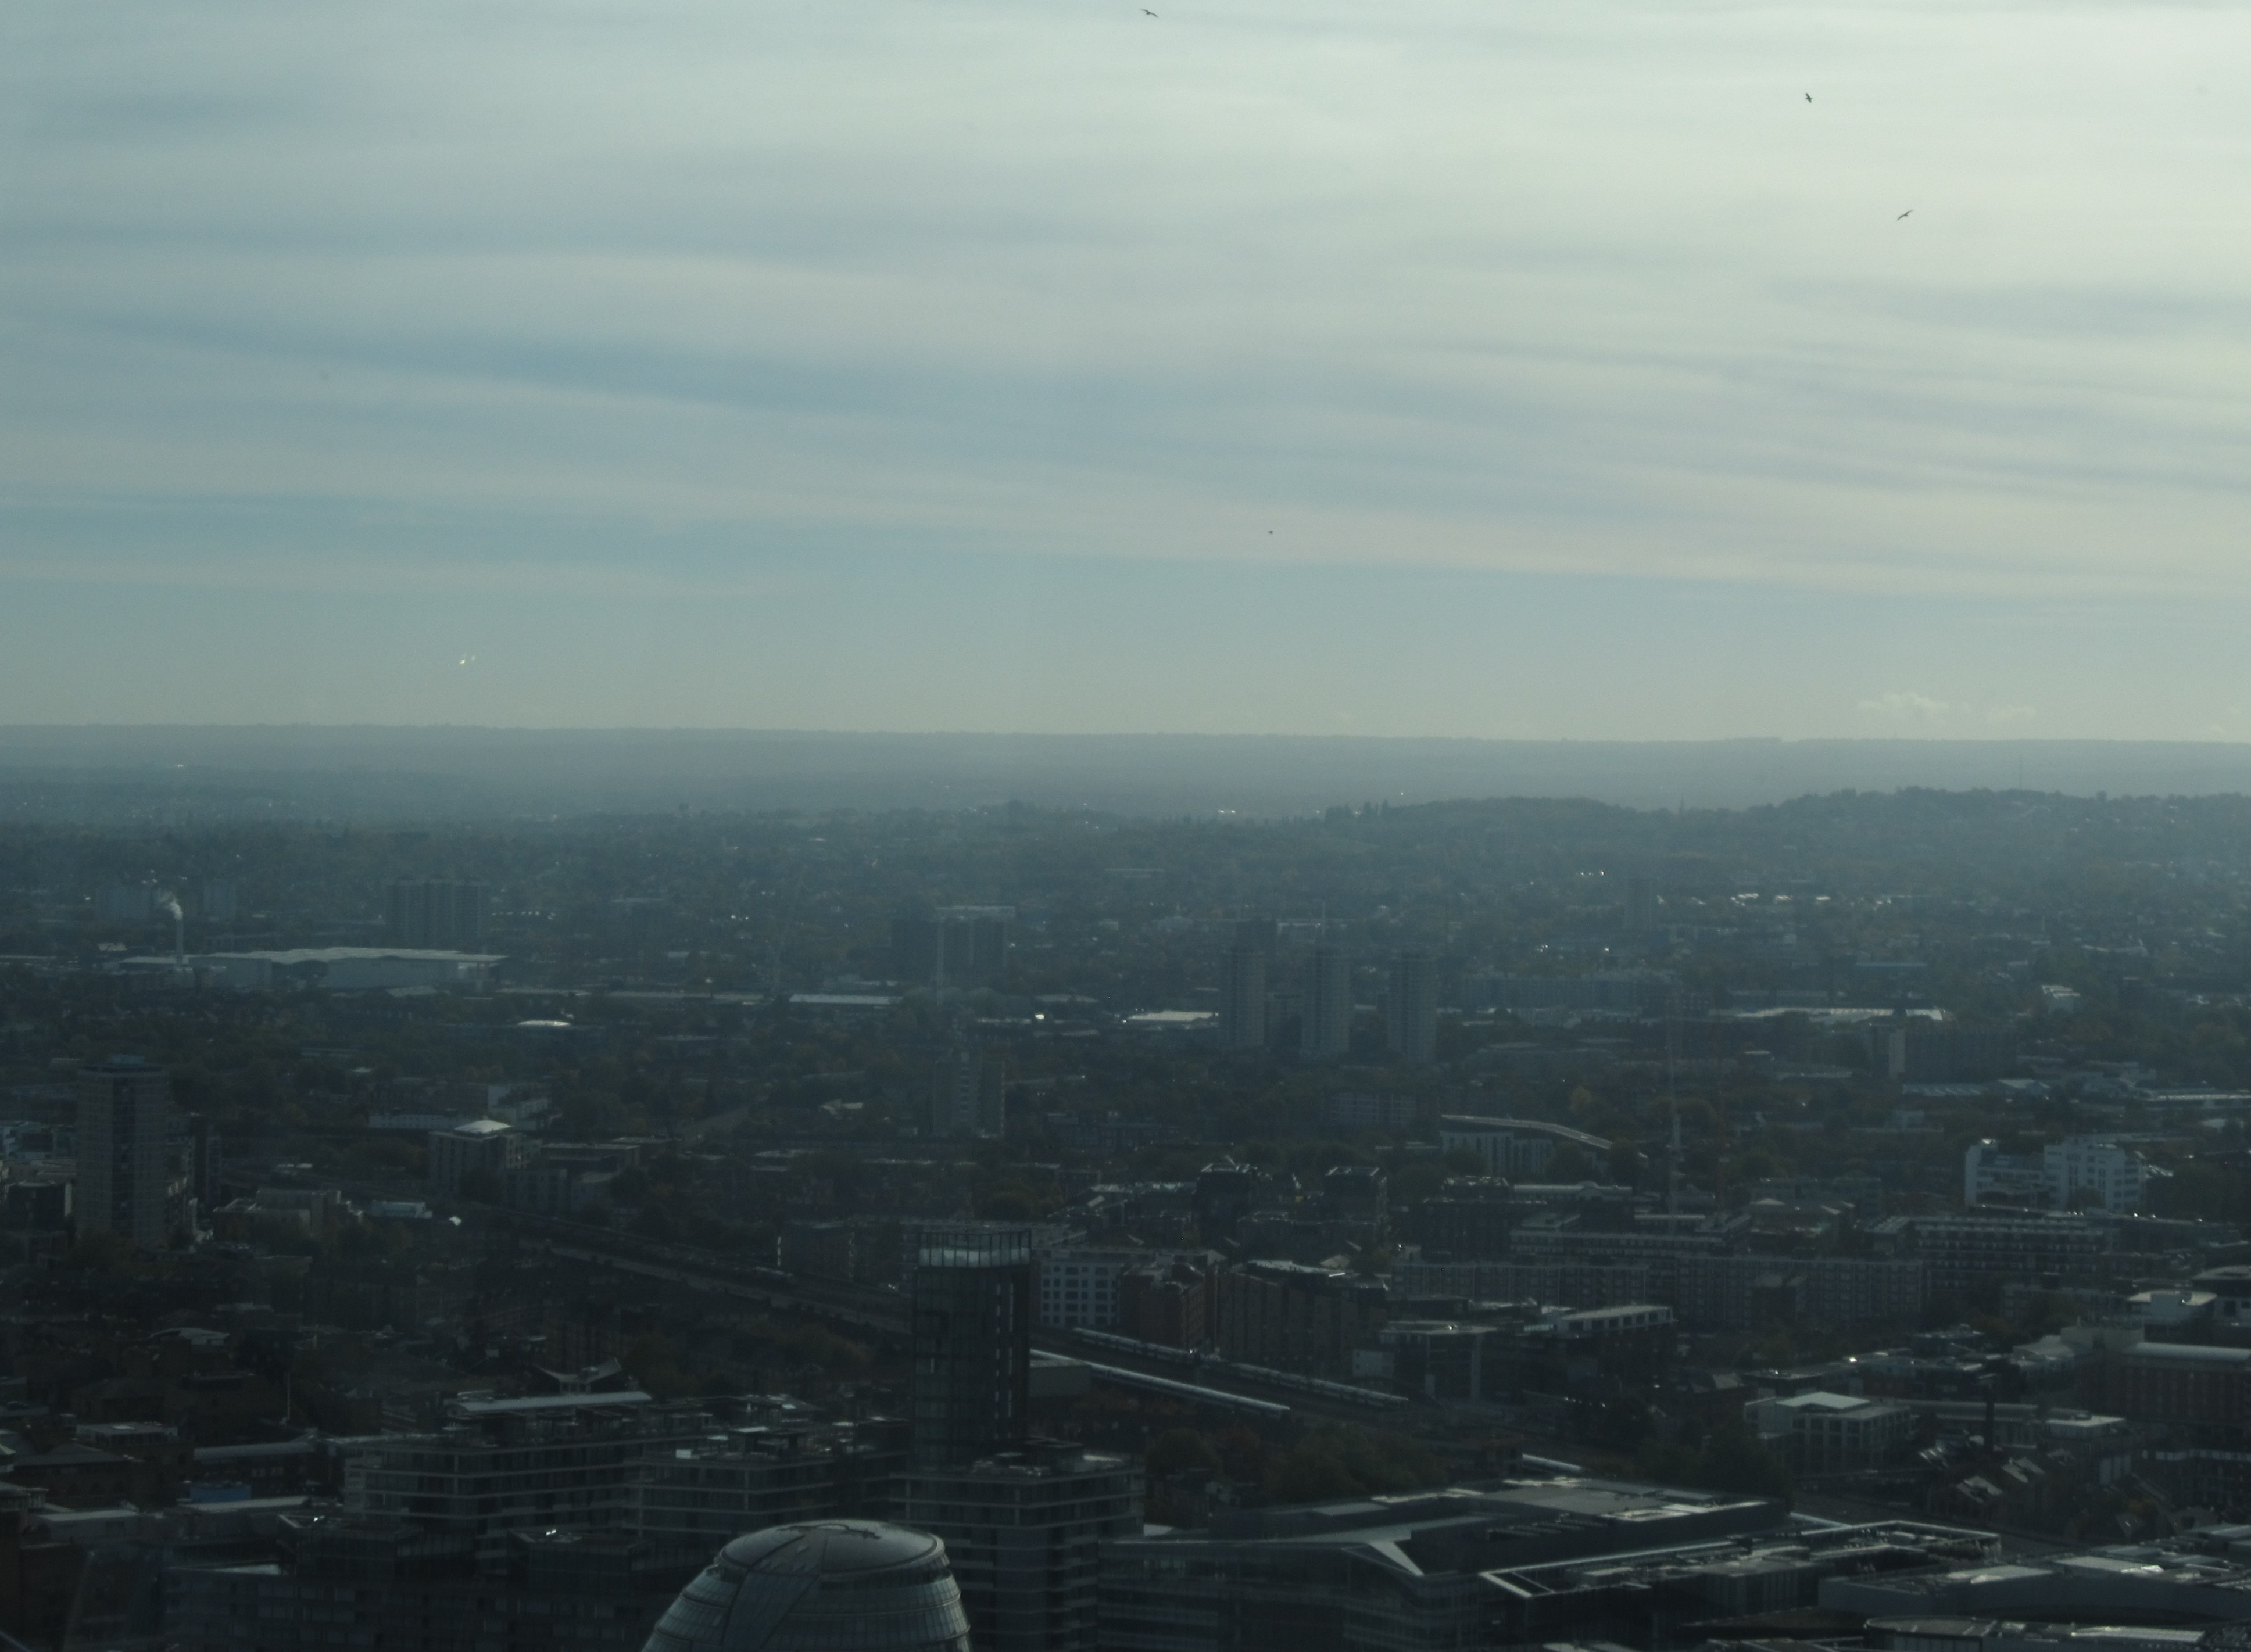 Brockley, Forest Hill and North Downs seen from Walkie Talkie Sky Garden